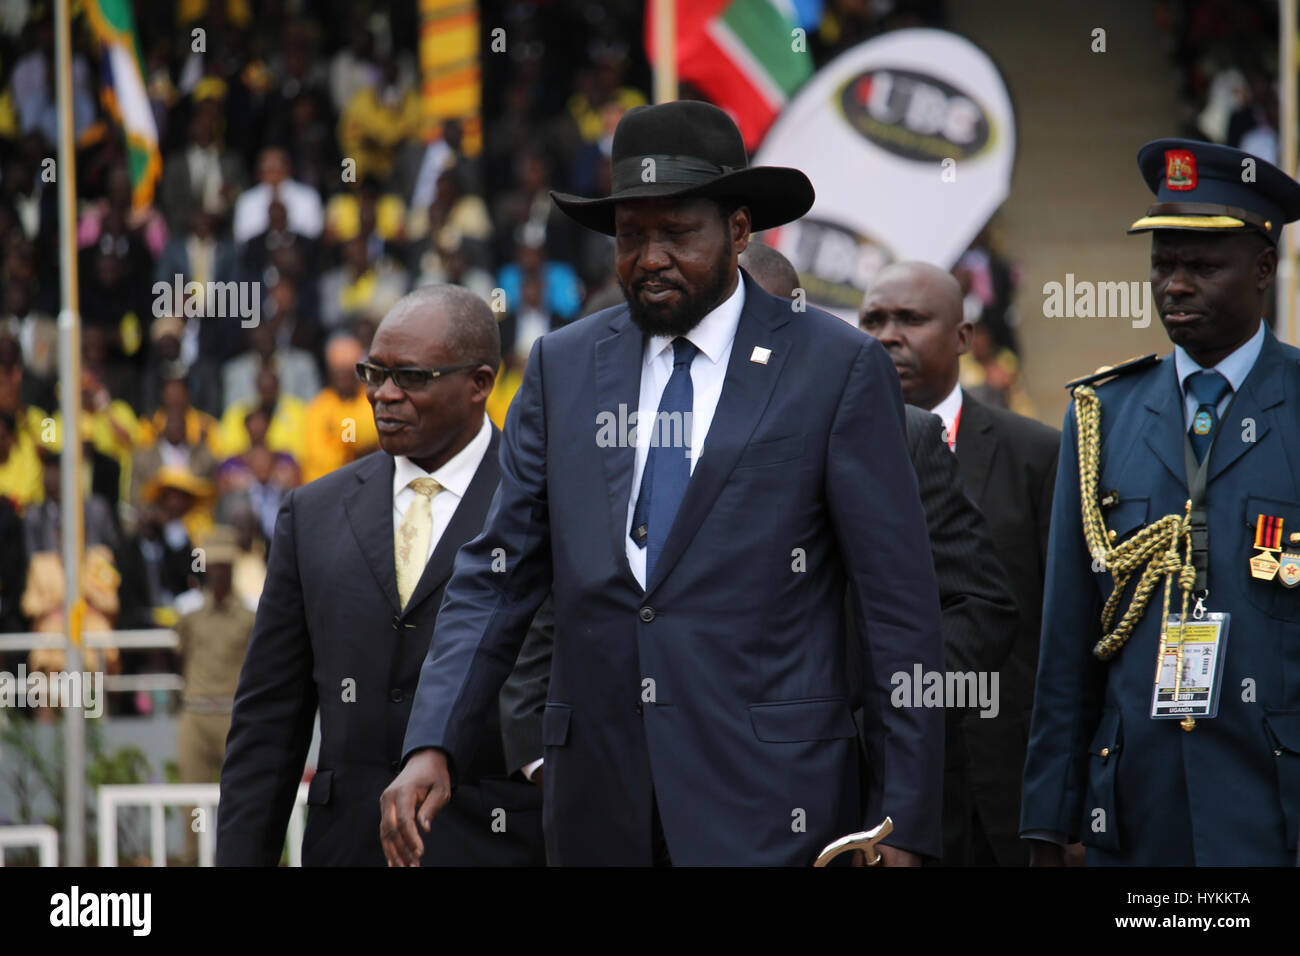 KAMPALA, UGANDA: South Sudan President Salva Kiir arrives wearing a black hat. Yoweri Museveni has been sworn in as president of Uganda today following elections that took place on February 18th 2016.  President Museveni can be seen taking the oath, signing the official documents, holding a ceremonial shield and inspecting the guard of honour. Other pictures show enthusiastic dancers, members of the police force as well as the armed forces band. The ceremony which took place during in Kampala, was the sixth time Museveni has been sworn in as president, having been in power for over thirty year Stock Photo